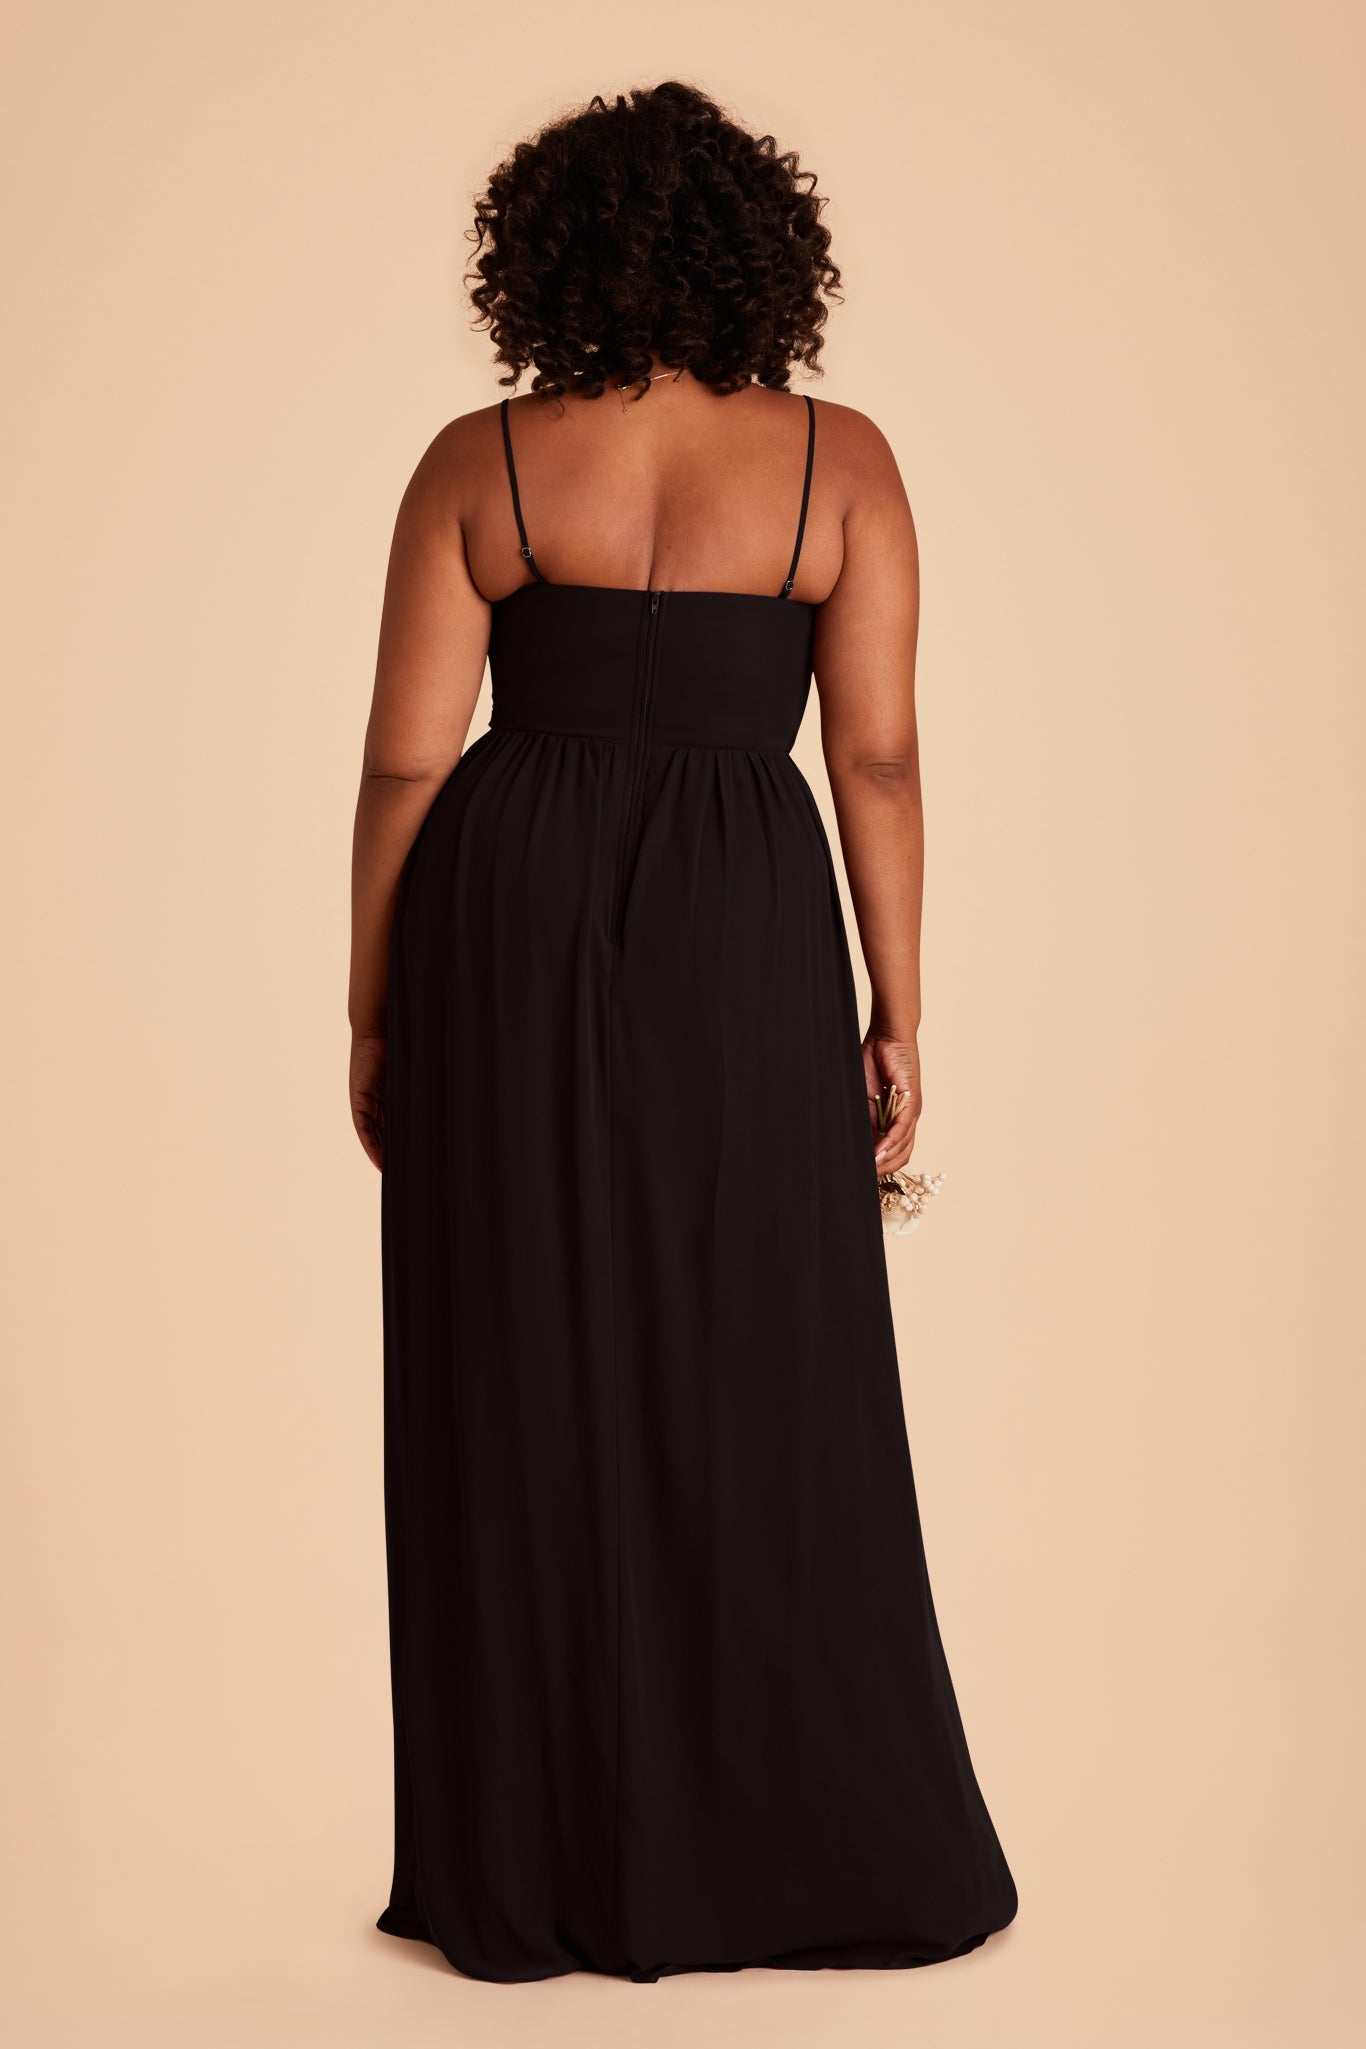 August plus size bridesmaid dress with slit in black chiffon by Birdy Grey, back view